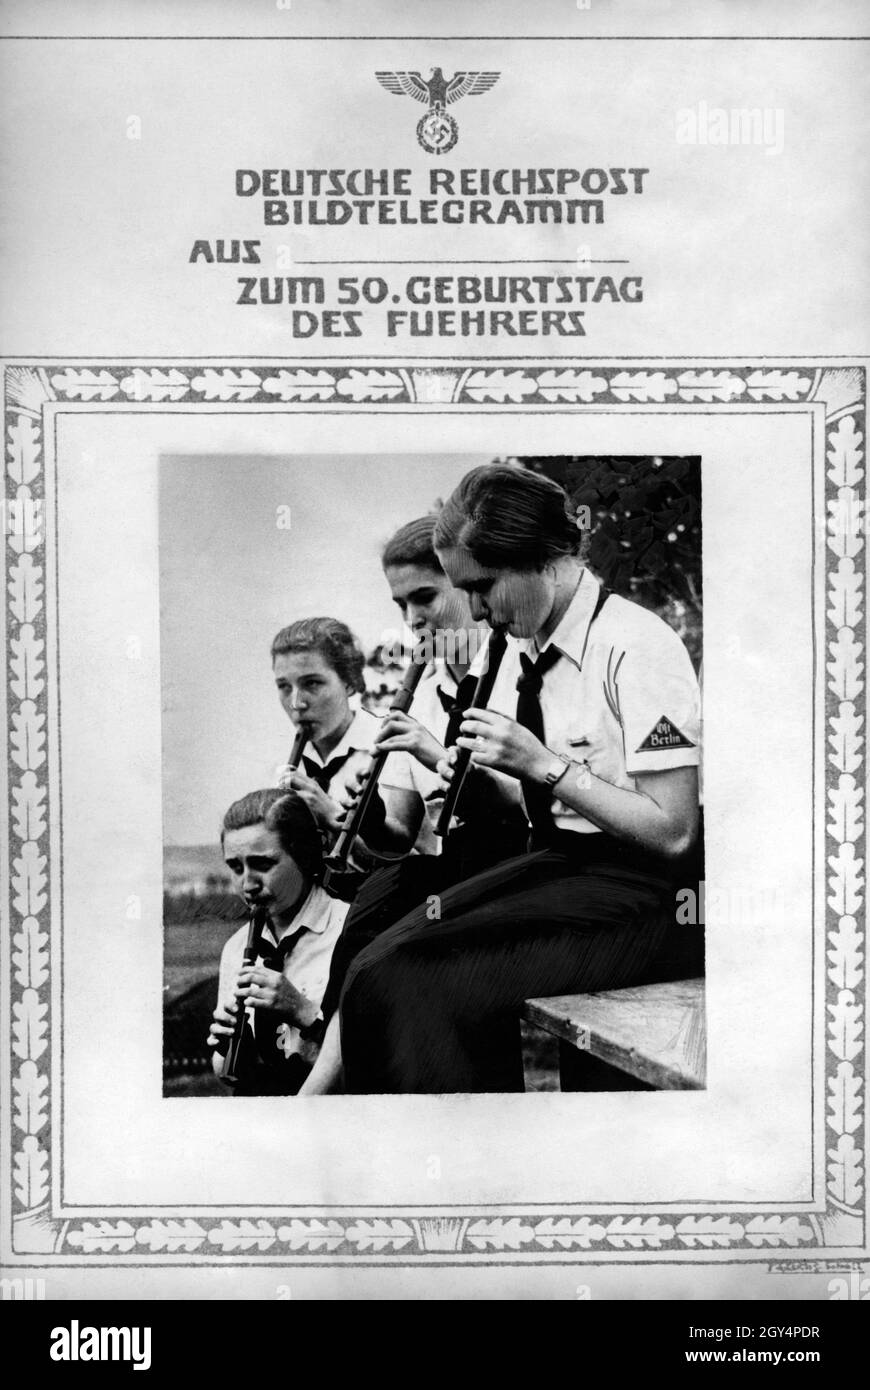 Happy birthday telegram from the German Reichspost on the occasion of Adolf Hitler's birthday in 1938, showing girls playing the flute from the Bund deutscher Mädel des Untergaus or Obergebiets Ost Berlin. The girl on the right wears a visible tradition triangle on her uniform shirt, indicating that she was already a member of the BDM before the Nazis seized power in 1933. [automated translation] Stock Photo